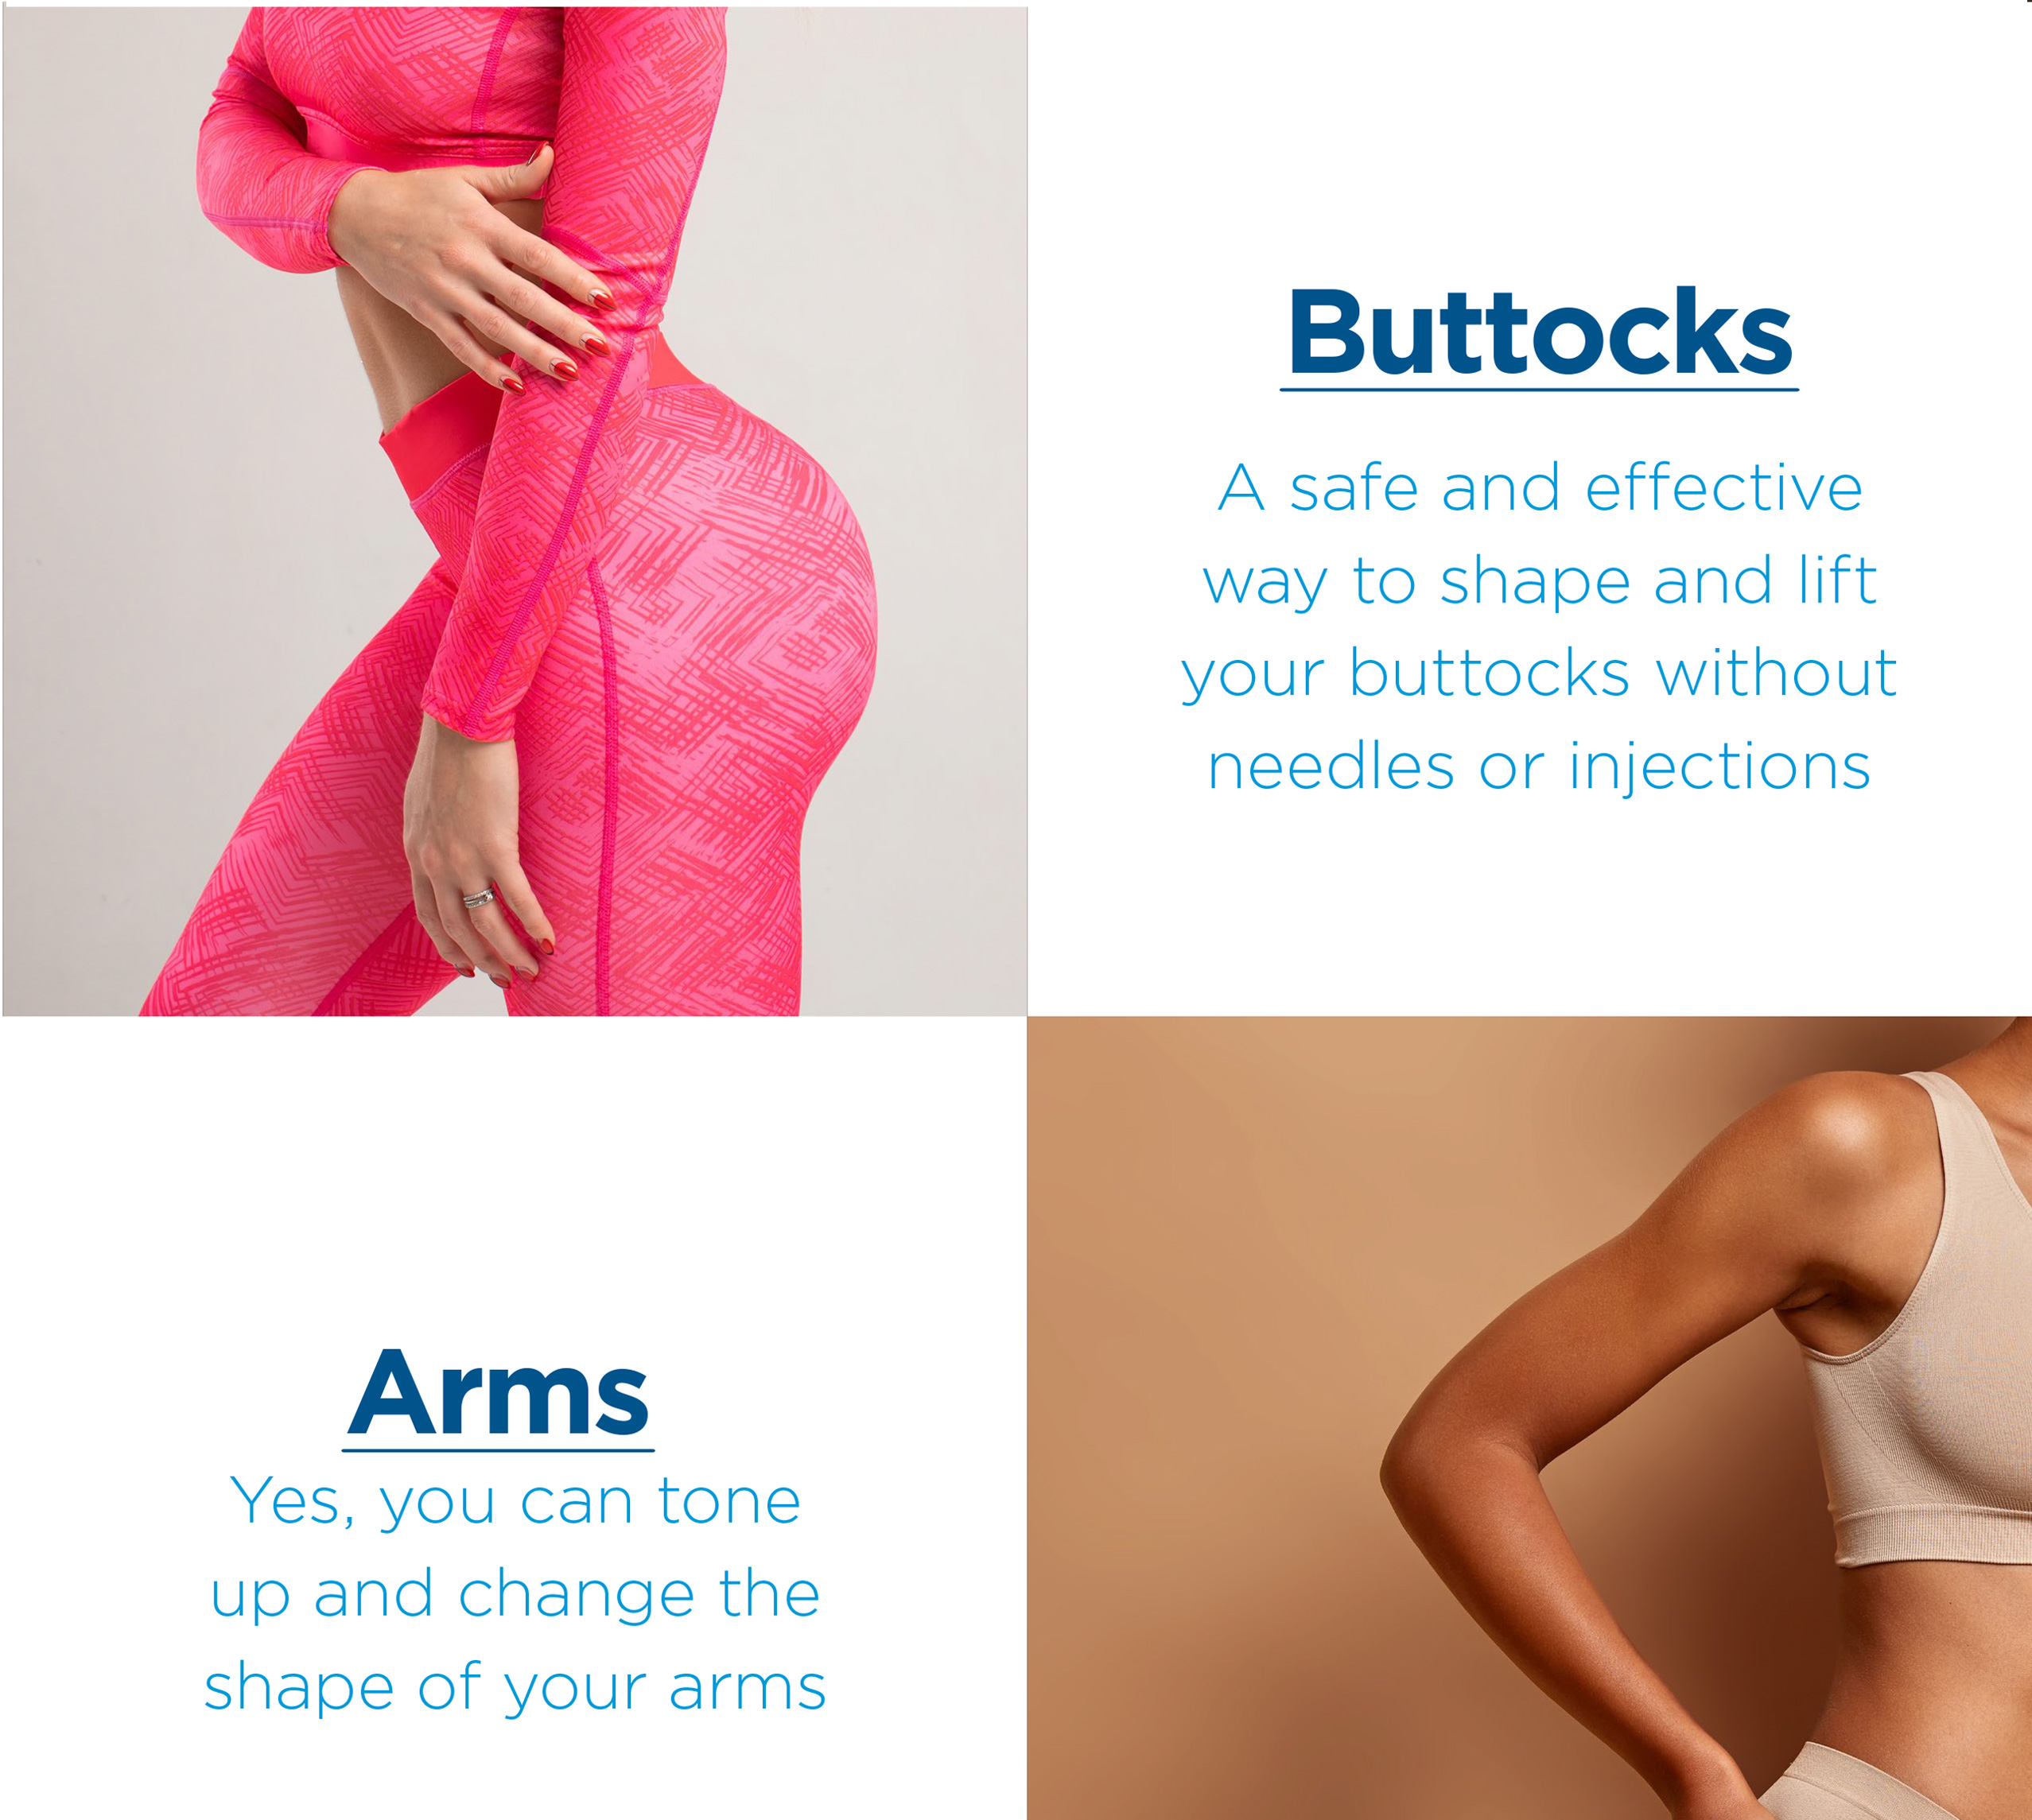 Emsculptneo on buttocks and arms